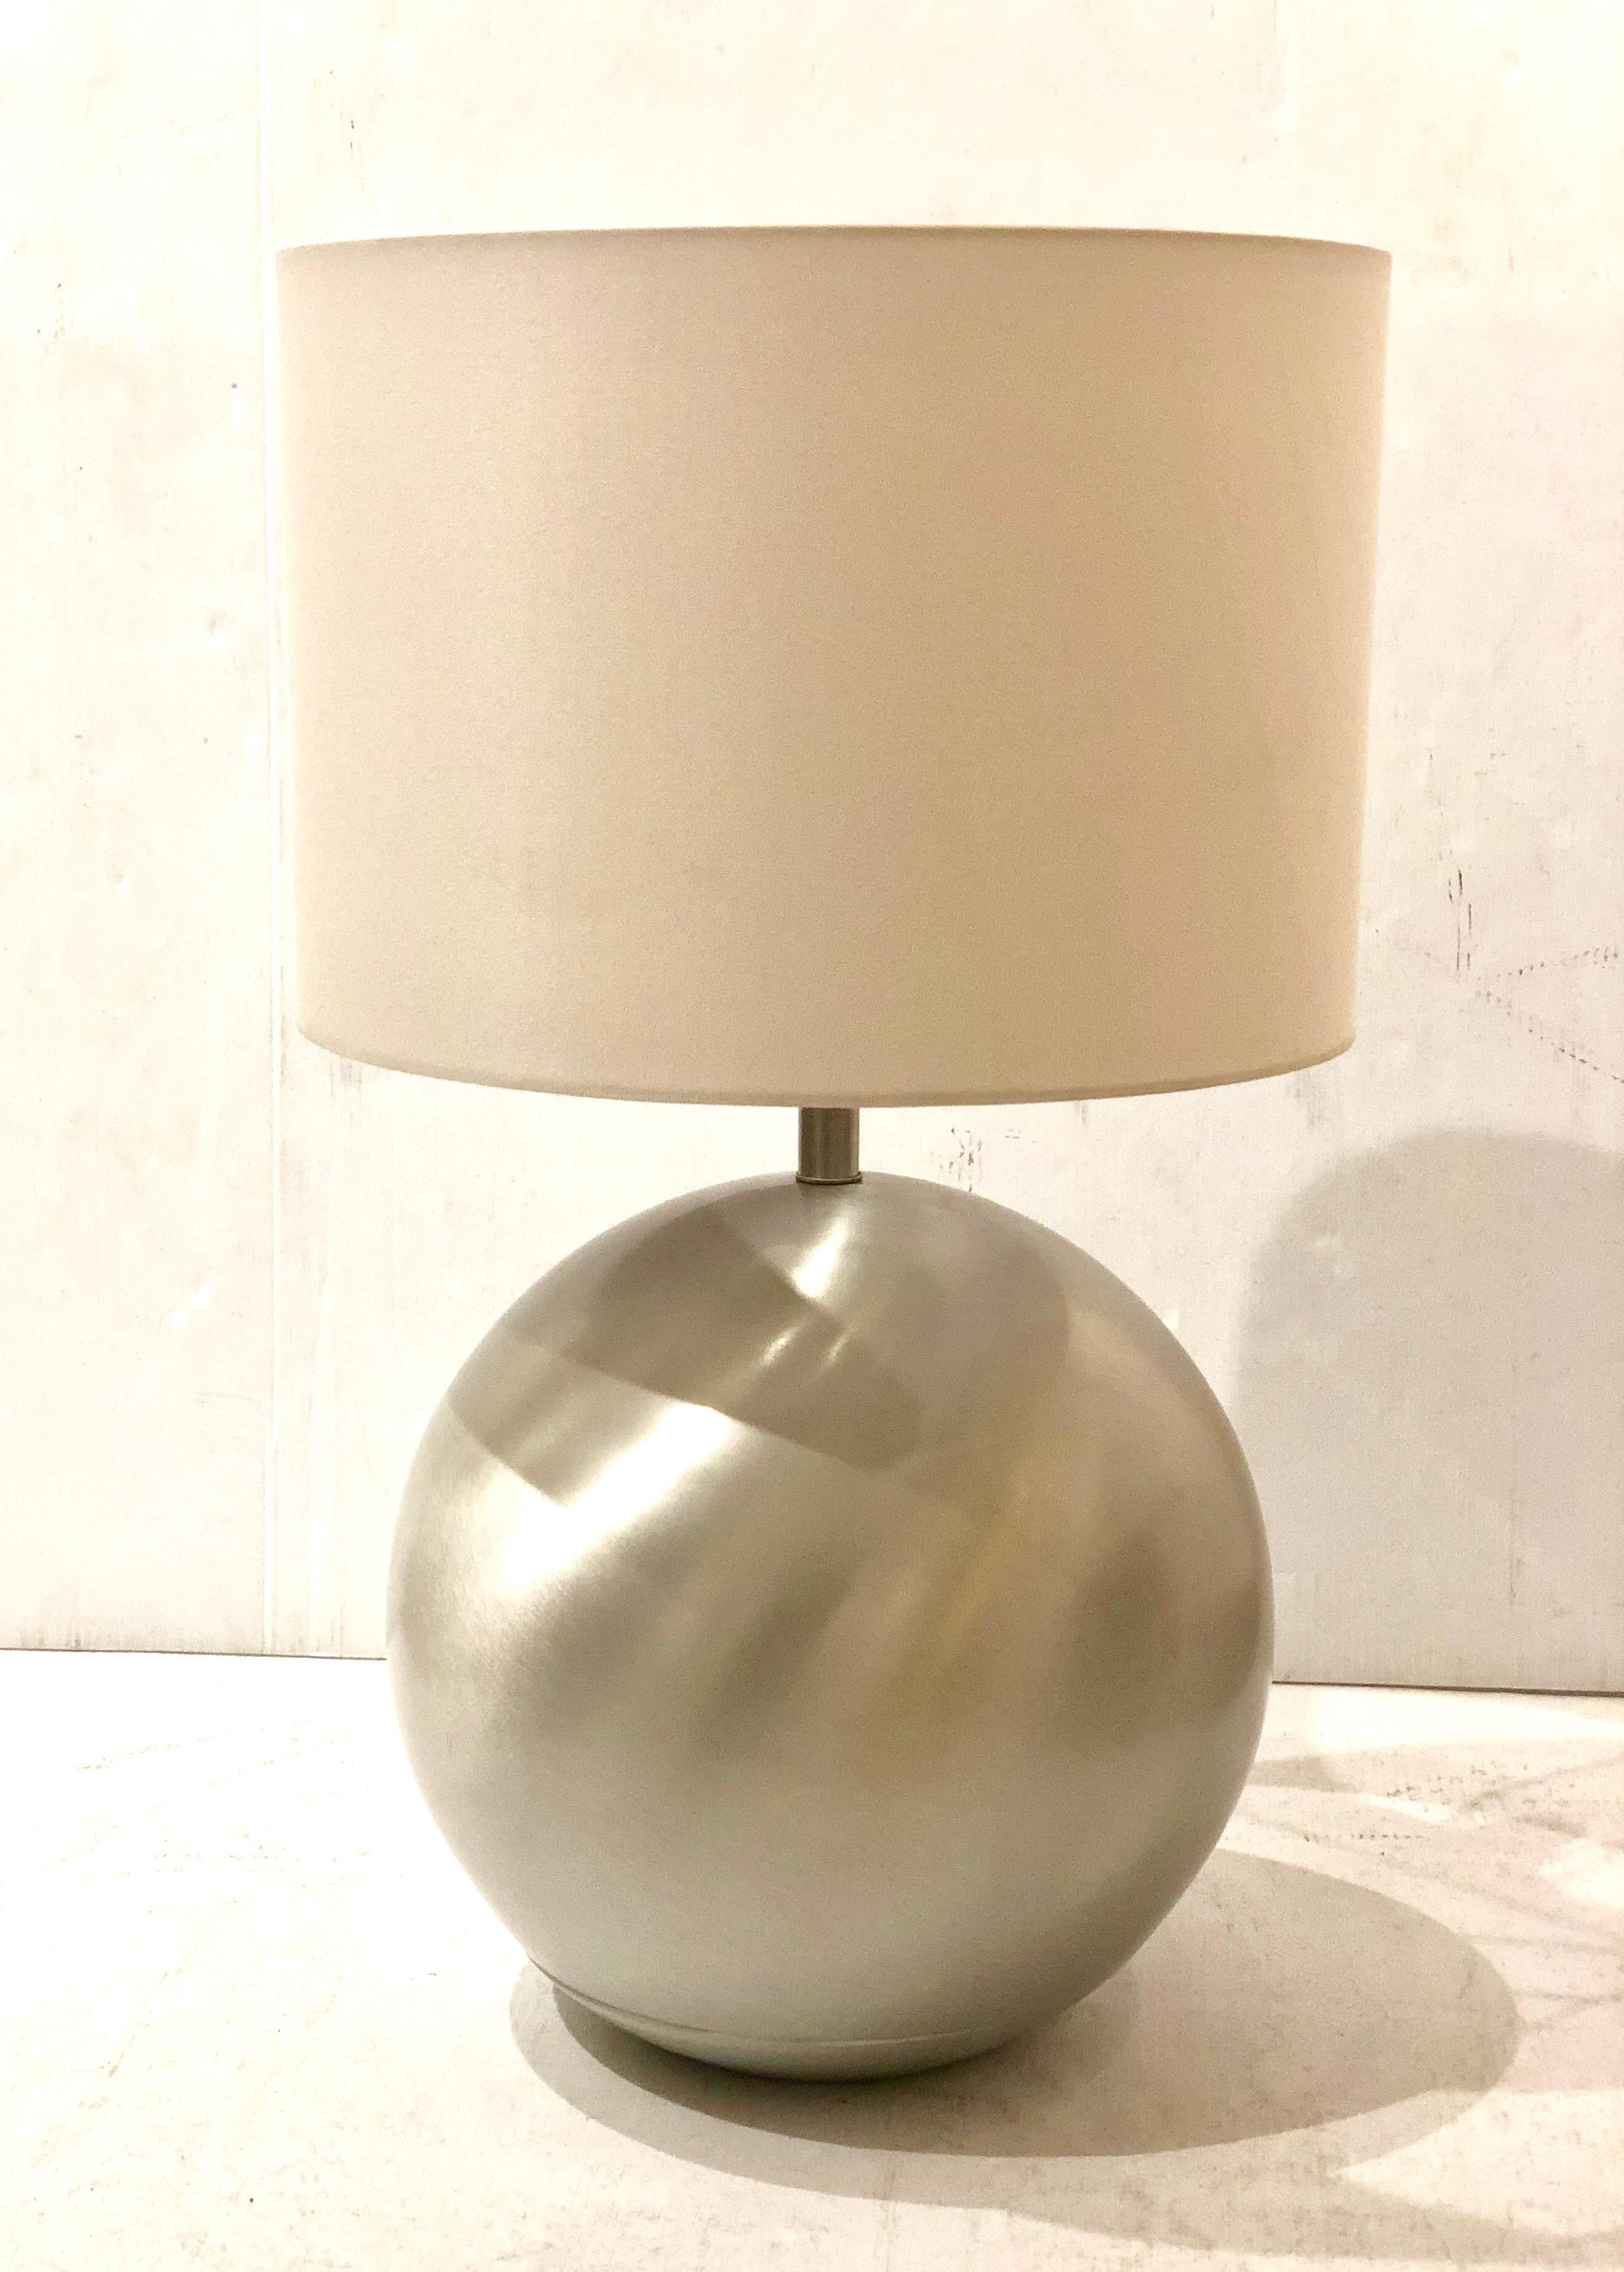 A very nice looking and rare Russel Wright for Raymor spun aluminum table lamp, circa 1950s. Newly rewired, new socket, cord and plug. New lamp shade, the shade its 17